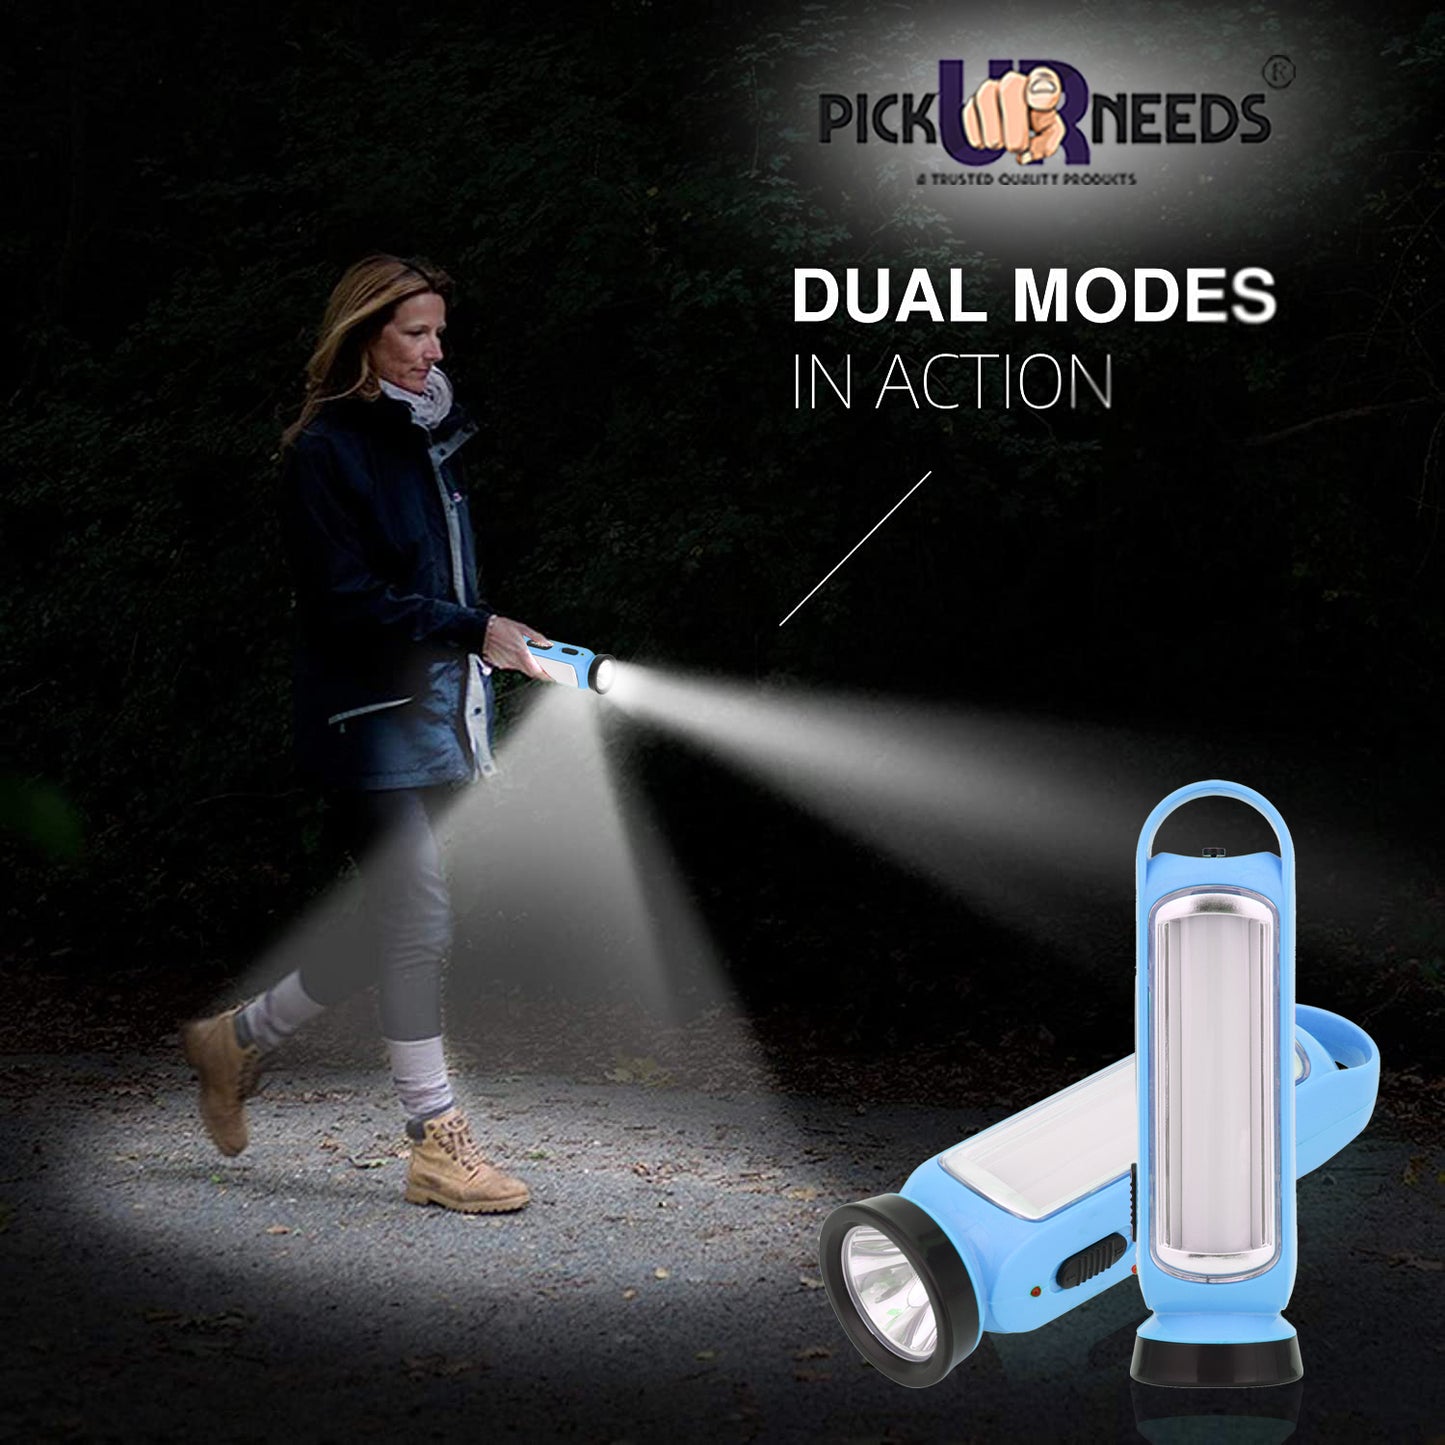 Pick Ur Needs Rechargeable Long Distance Torch LED Light Bright SMD Tube Flashlight Torch